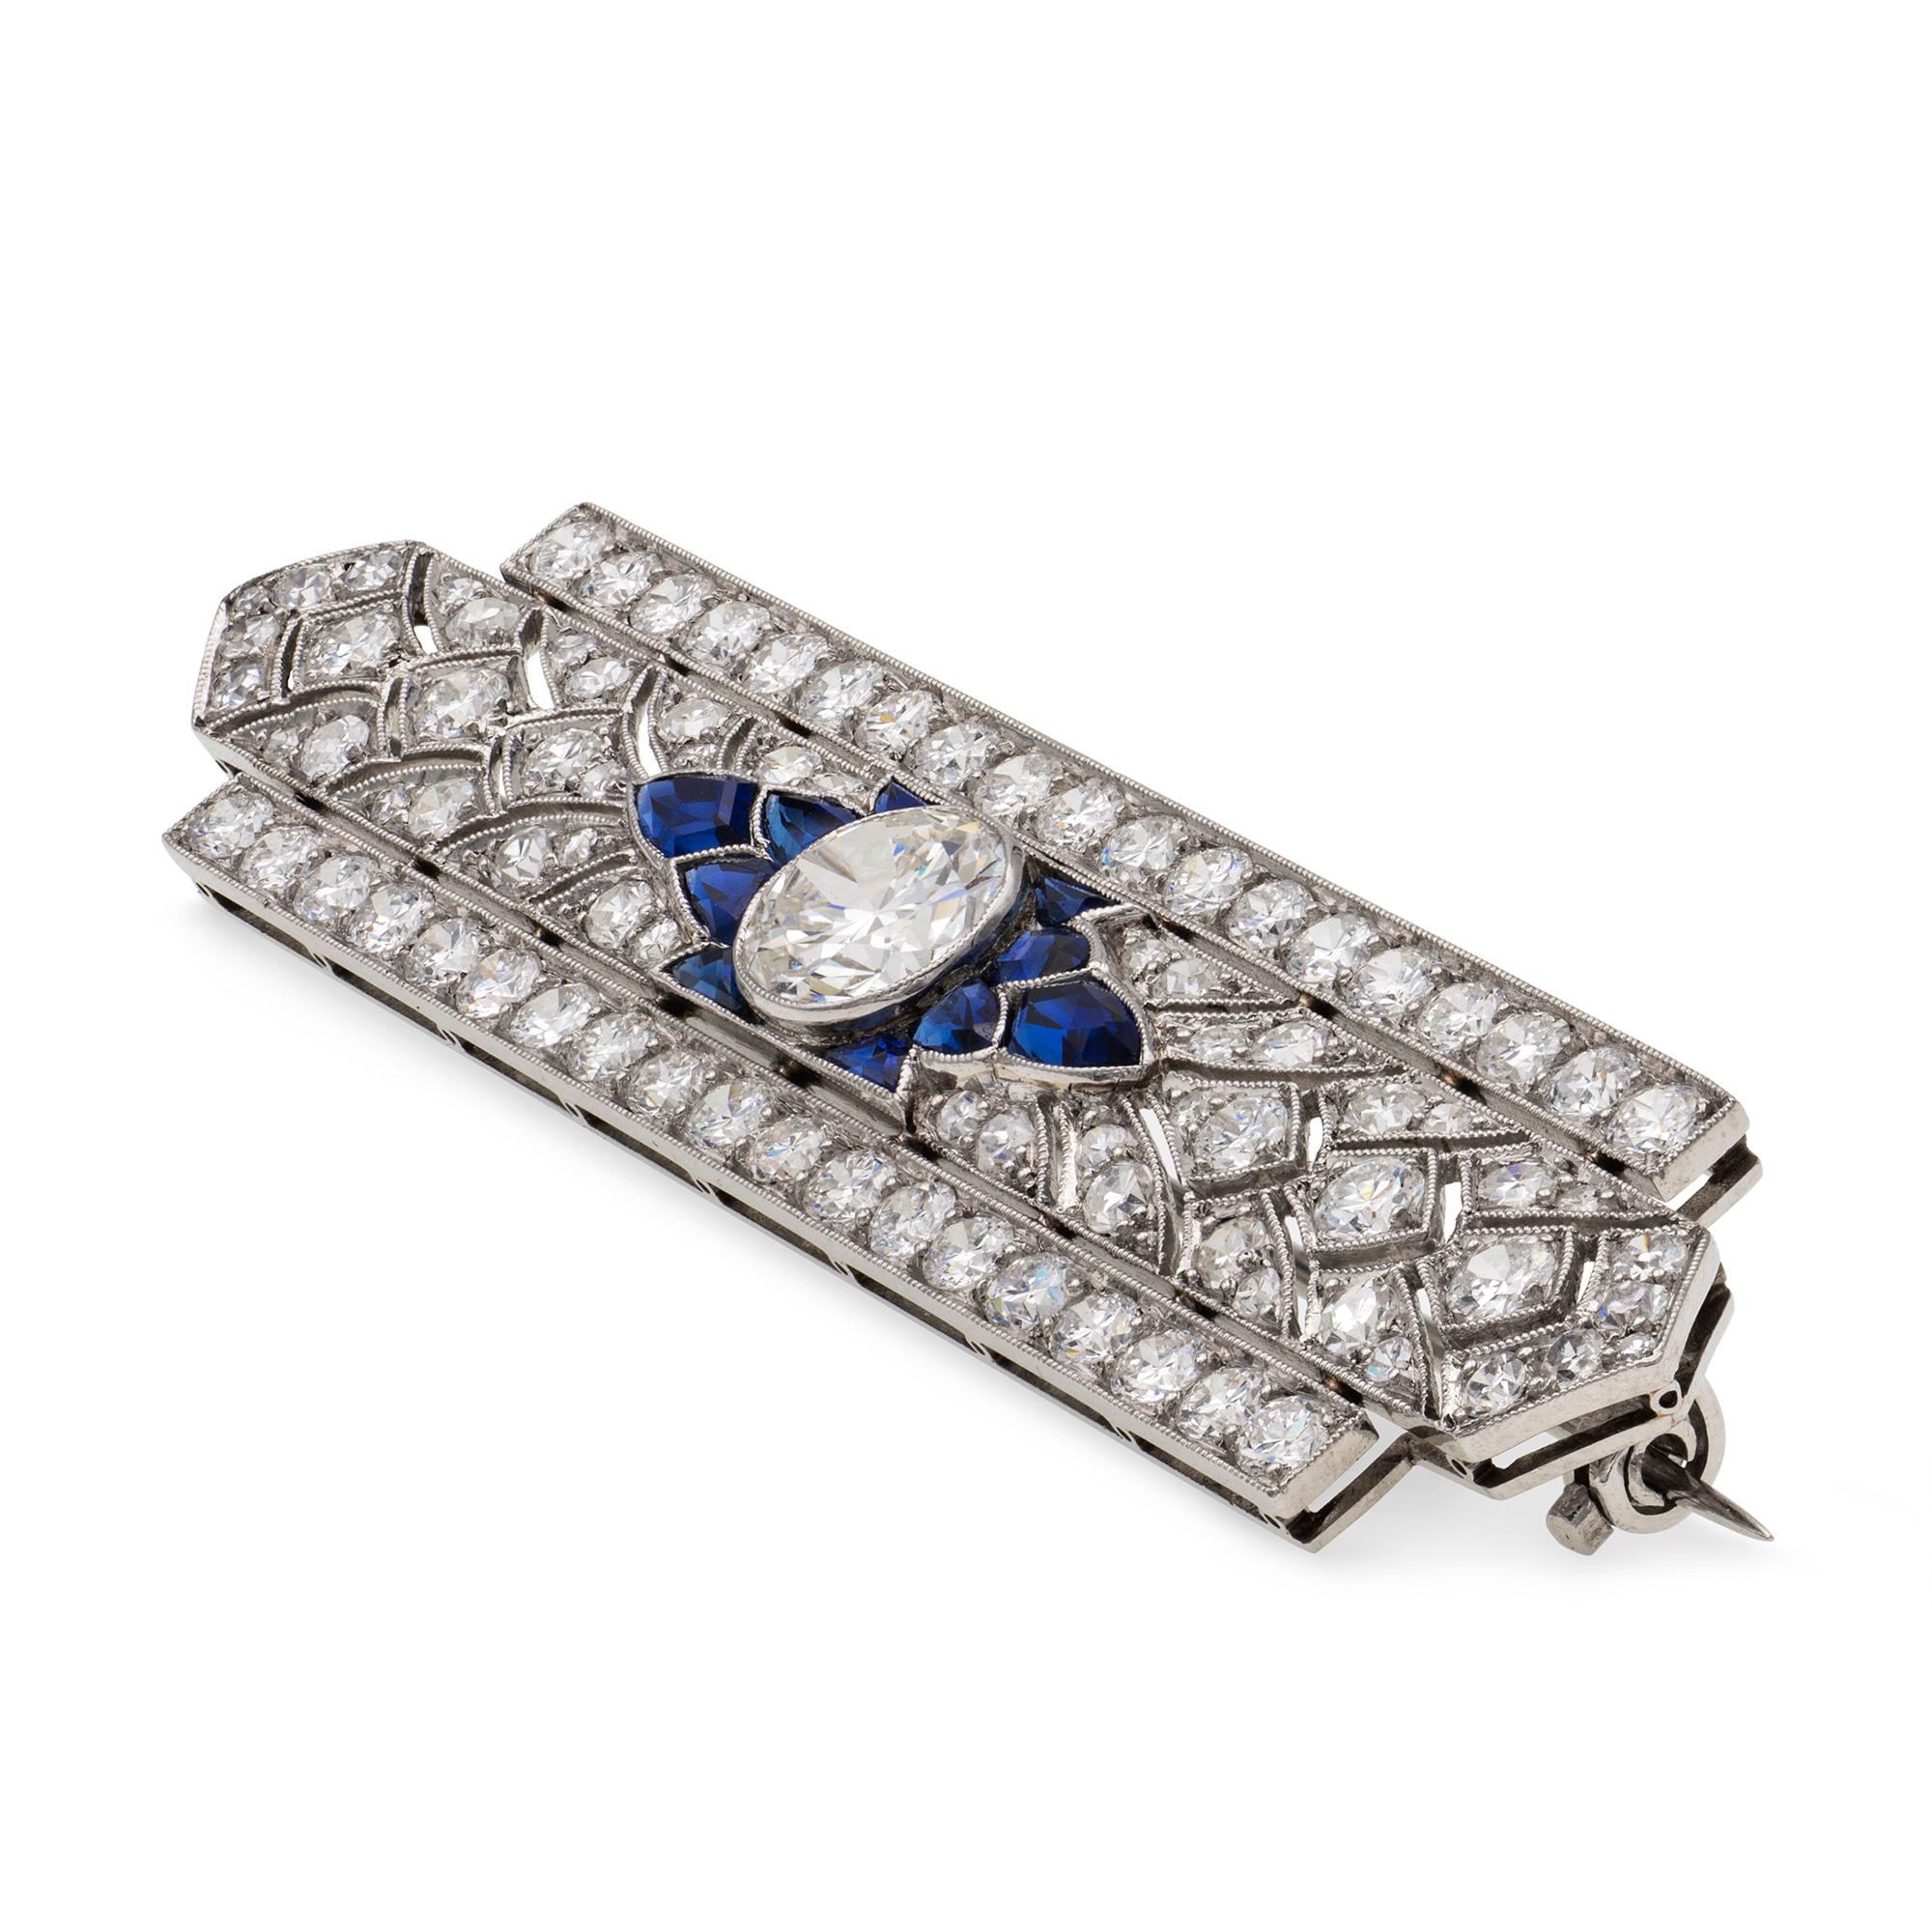 A Fine Art Deco Diamond And Sapphire Bar Brooch In Excellent Condition For Sale In London, GB